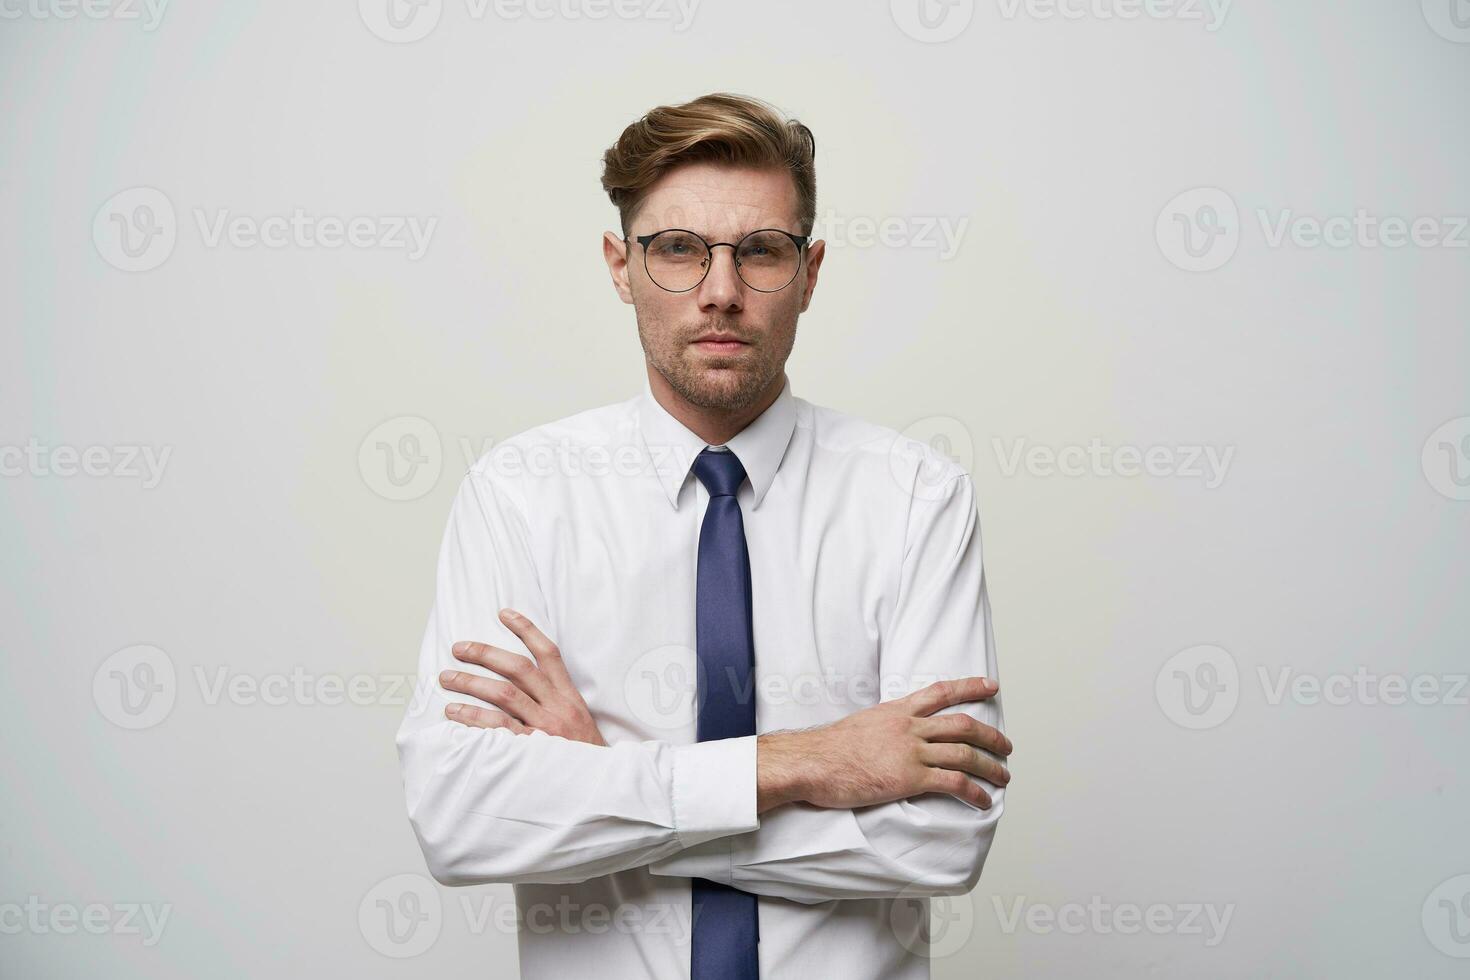 Portrait of young attractive man looks evaluative, reflects, eyes slightly narrowed, looks through glasses, hands are crossed, unshaven, dressed in white shirt and blue tie,over white background photo